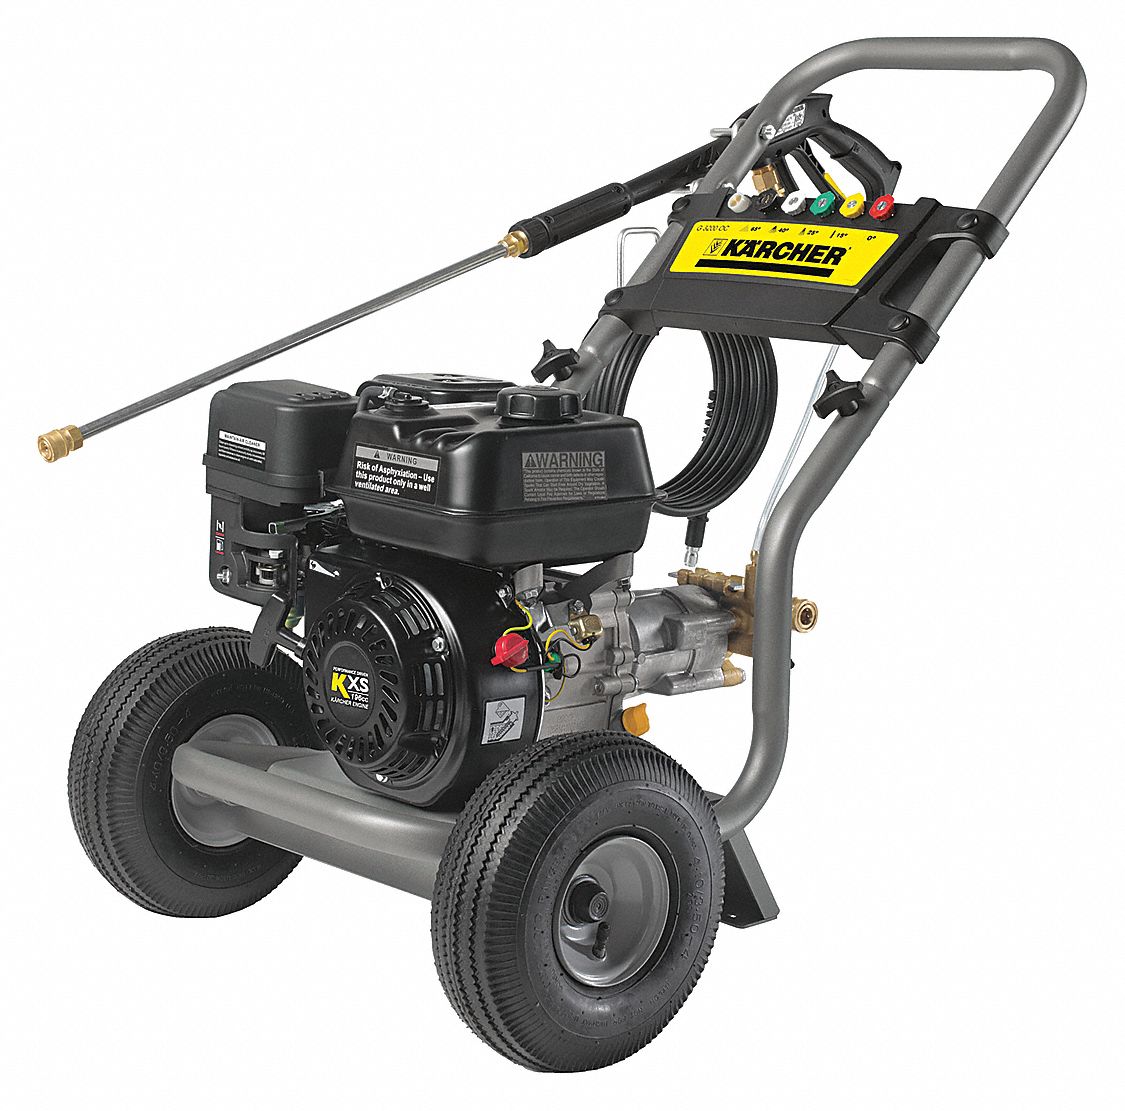 KARCHER Pressure Washer, Cold Water Type, 3200 psi Operating Pressure, 2.3 gpm Flow Rate   Gas Pressure Washers   36RM48|G3200OC